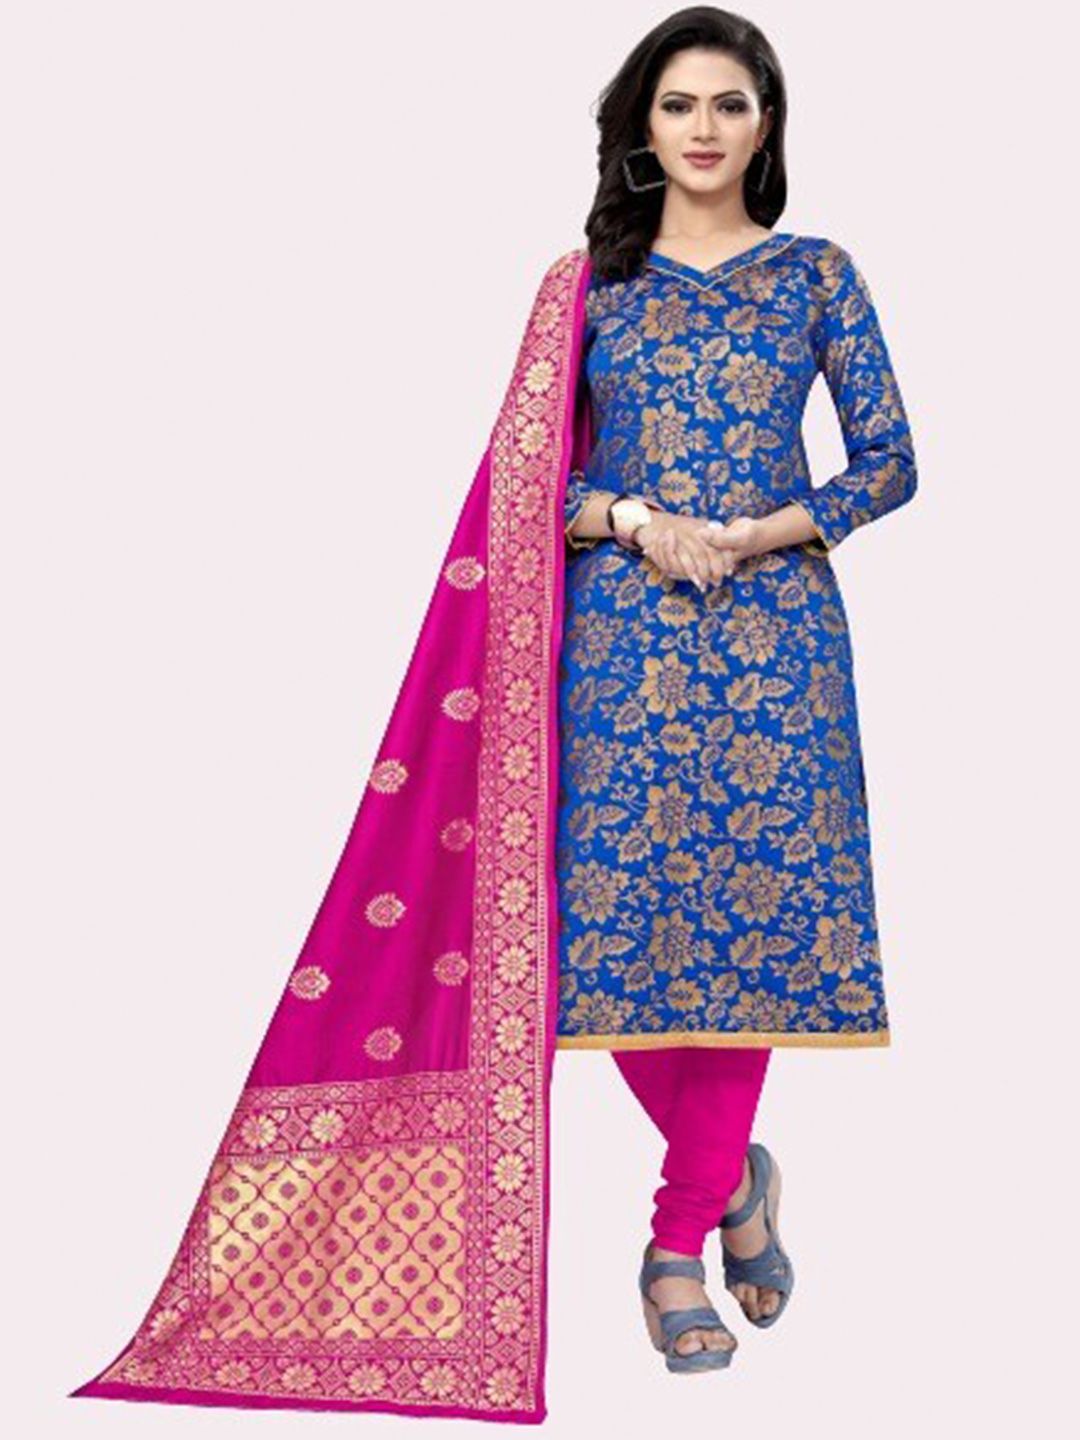 MORLY Blue & Pink Dupion Silk Woven Design Unstitched Dress Material Price in India